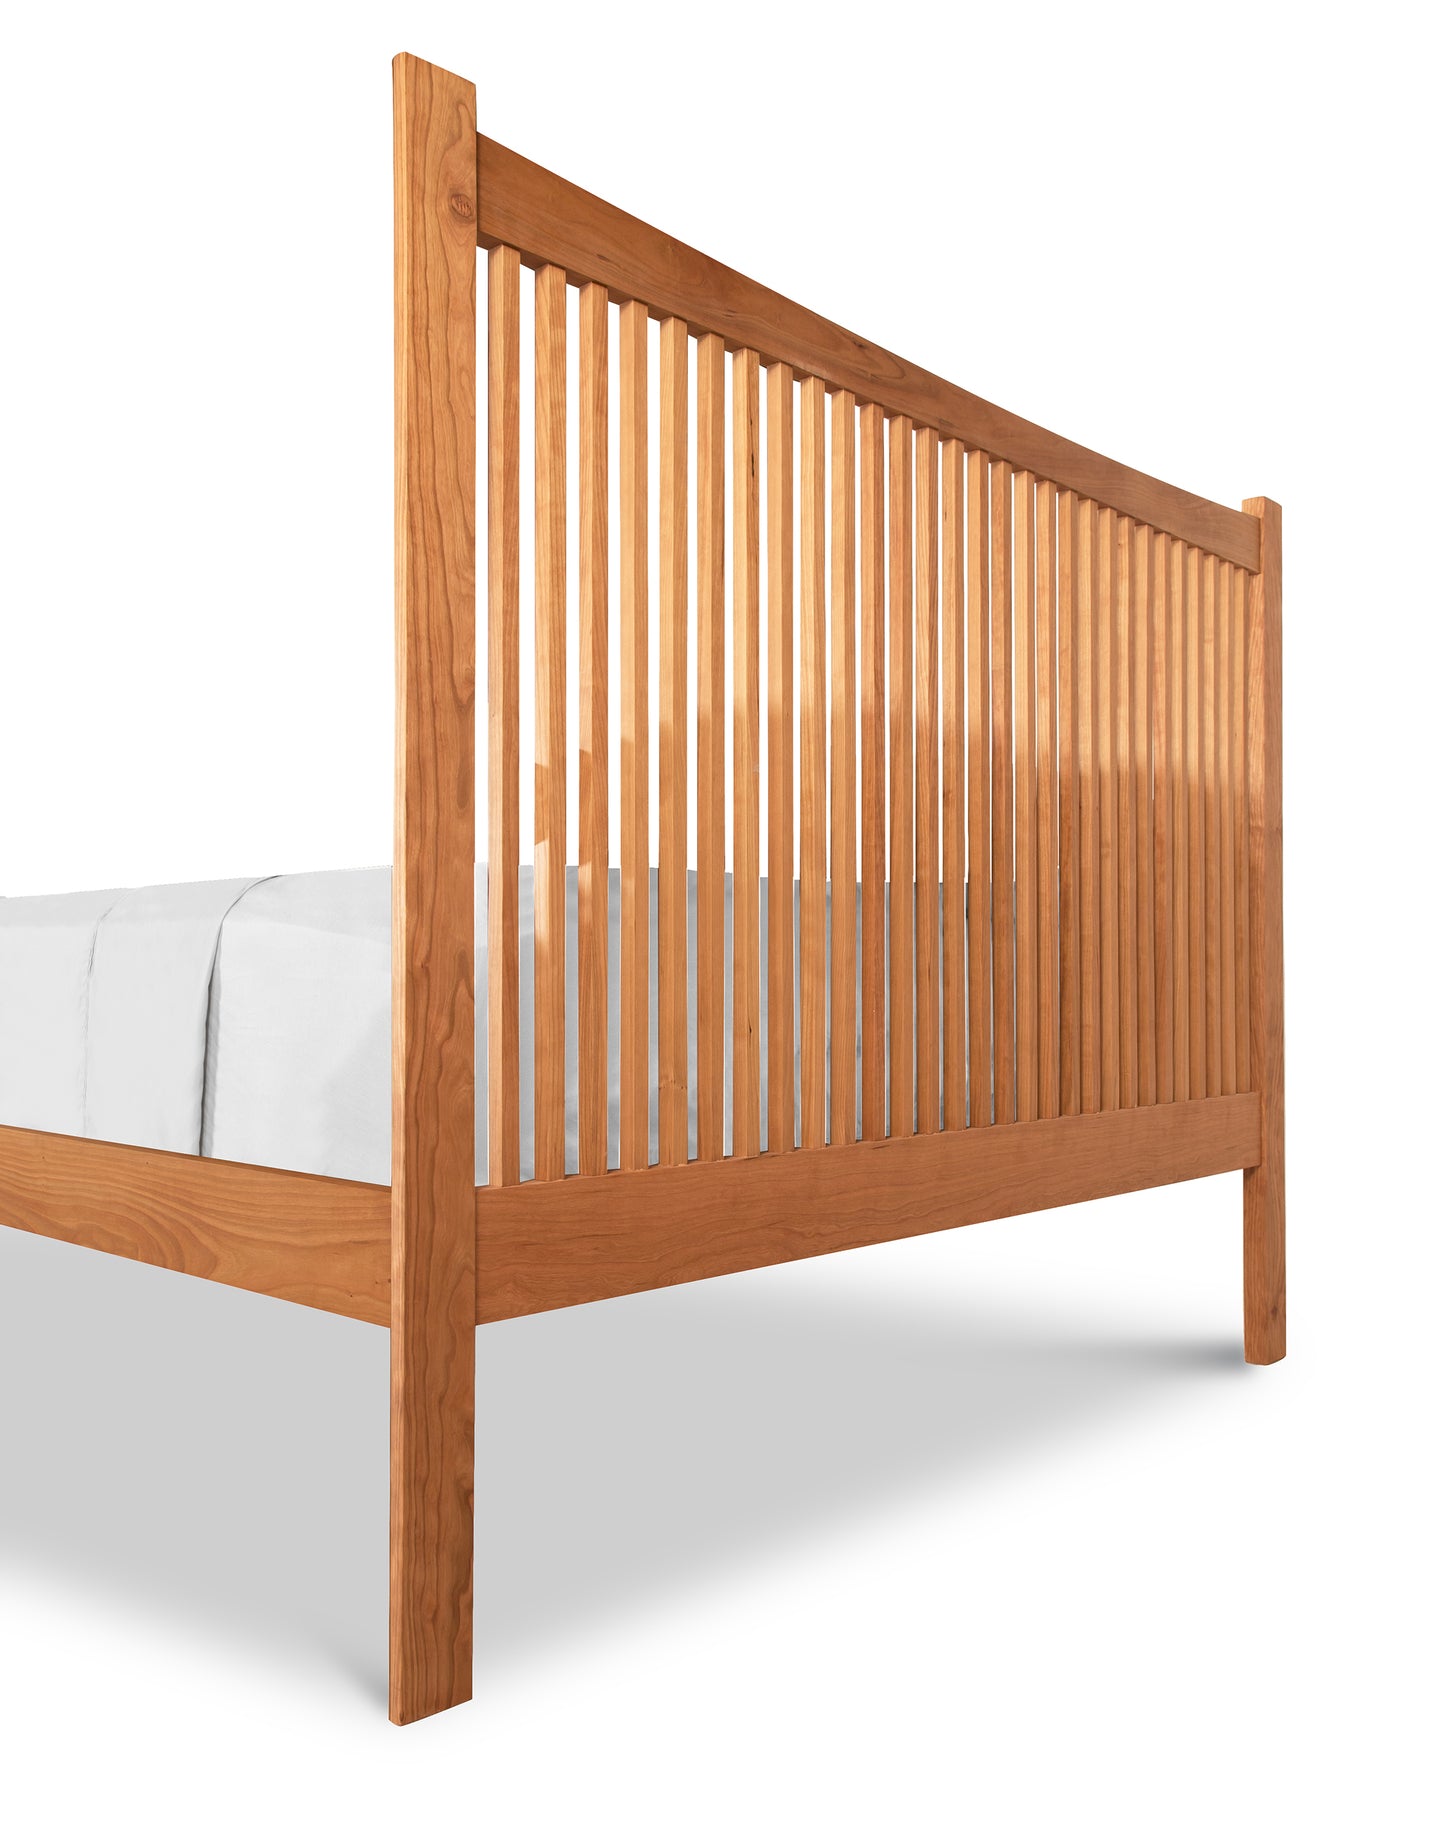 This Heartwood Shaker Low Footboard Bed by Vermont Furniture Designs features Arts and Crafts styling and sturdy wooden slats.